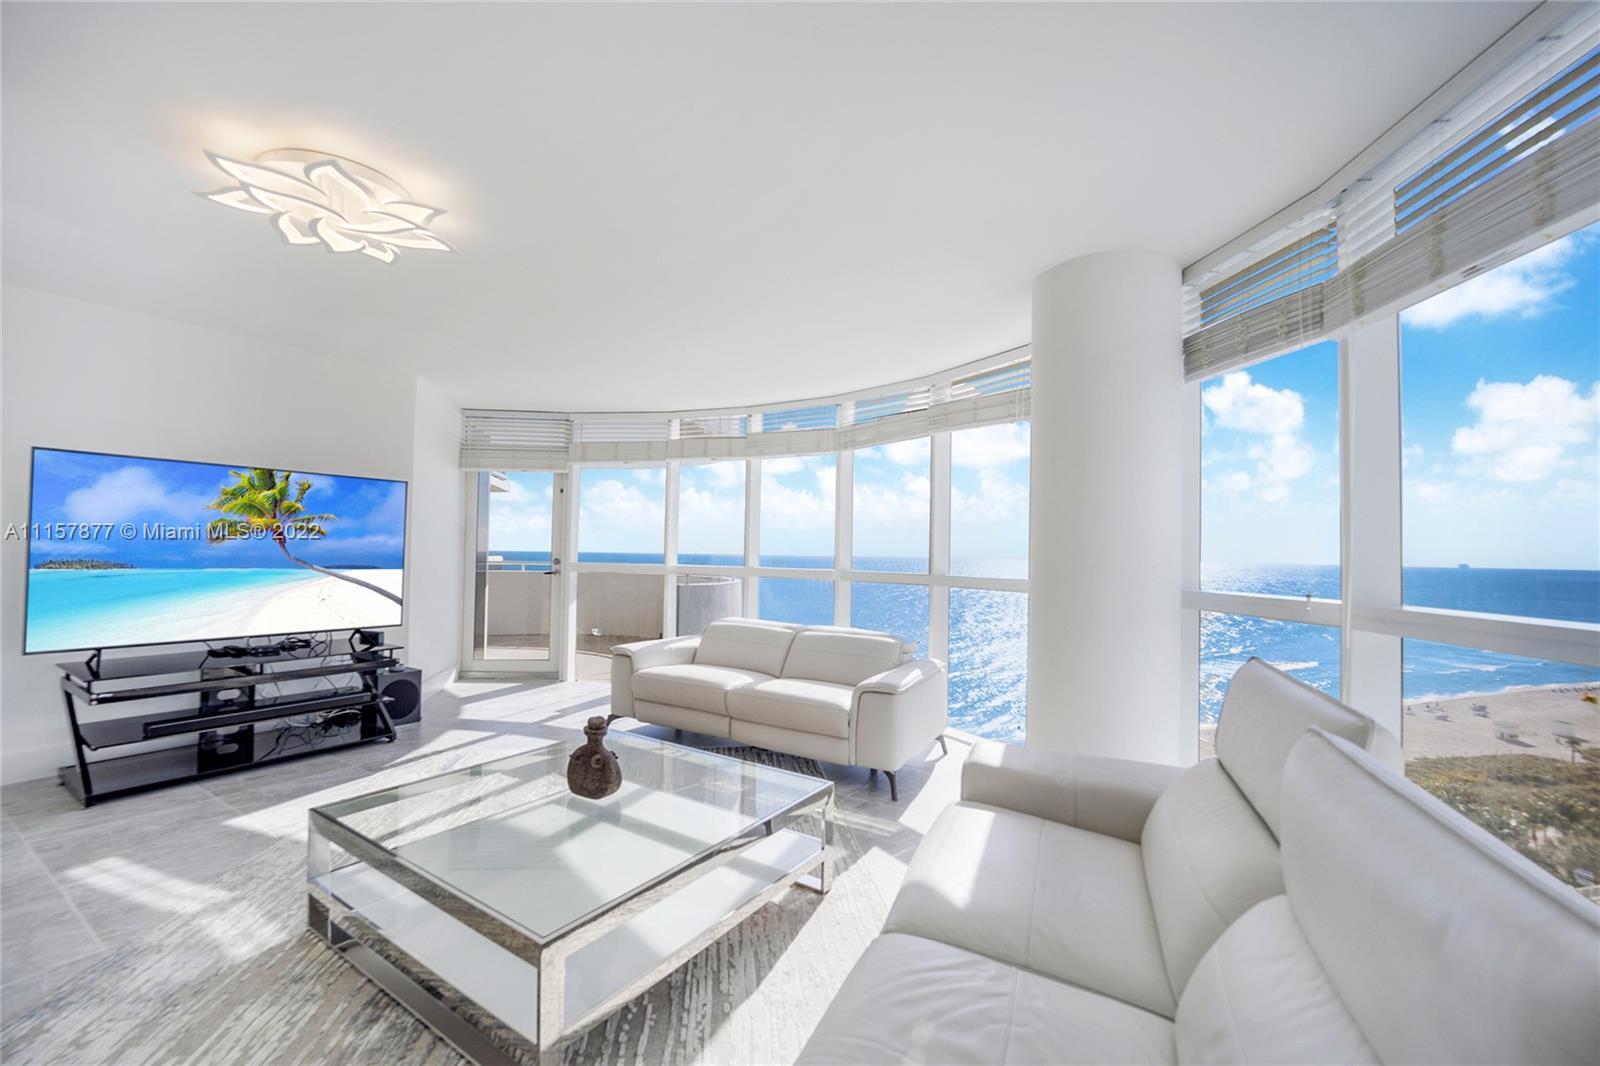 La Gorce Palace is located on the shore of the bright blue waters of Miami Beach. Exquisite direct o